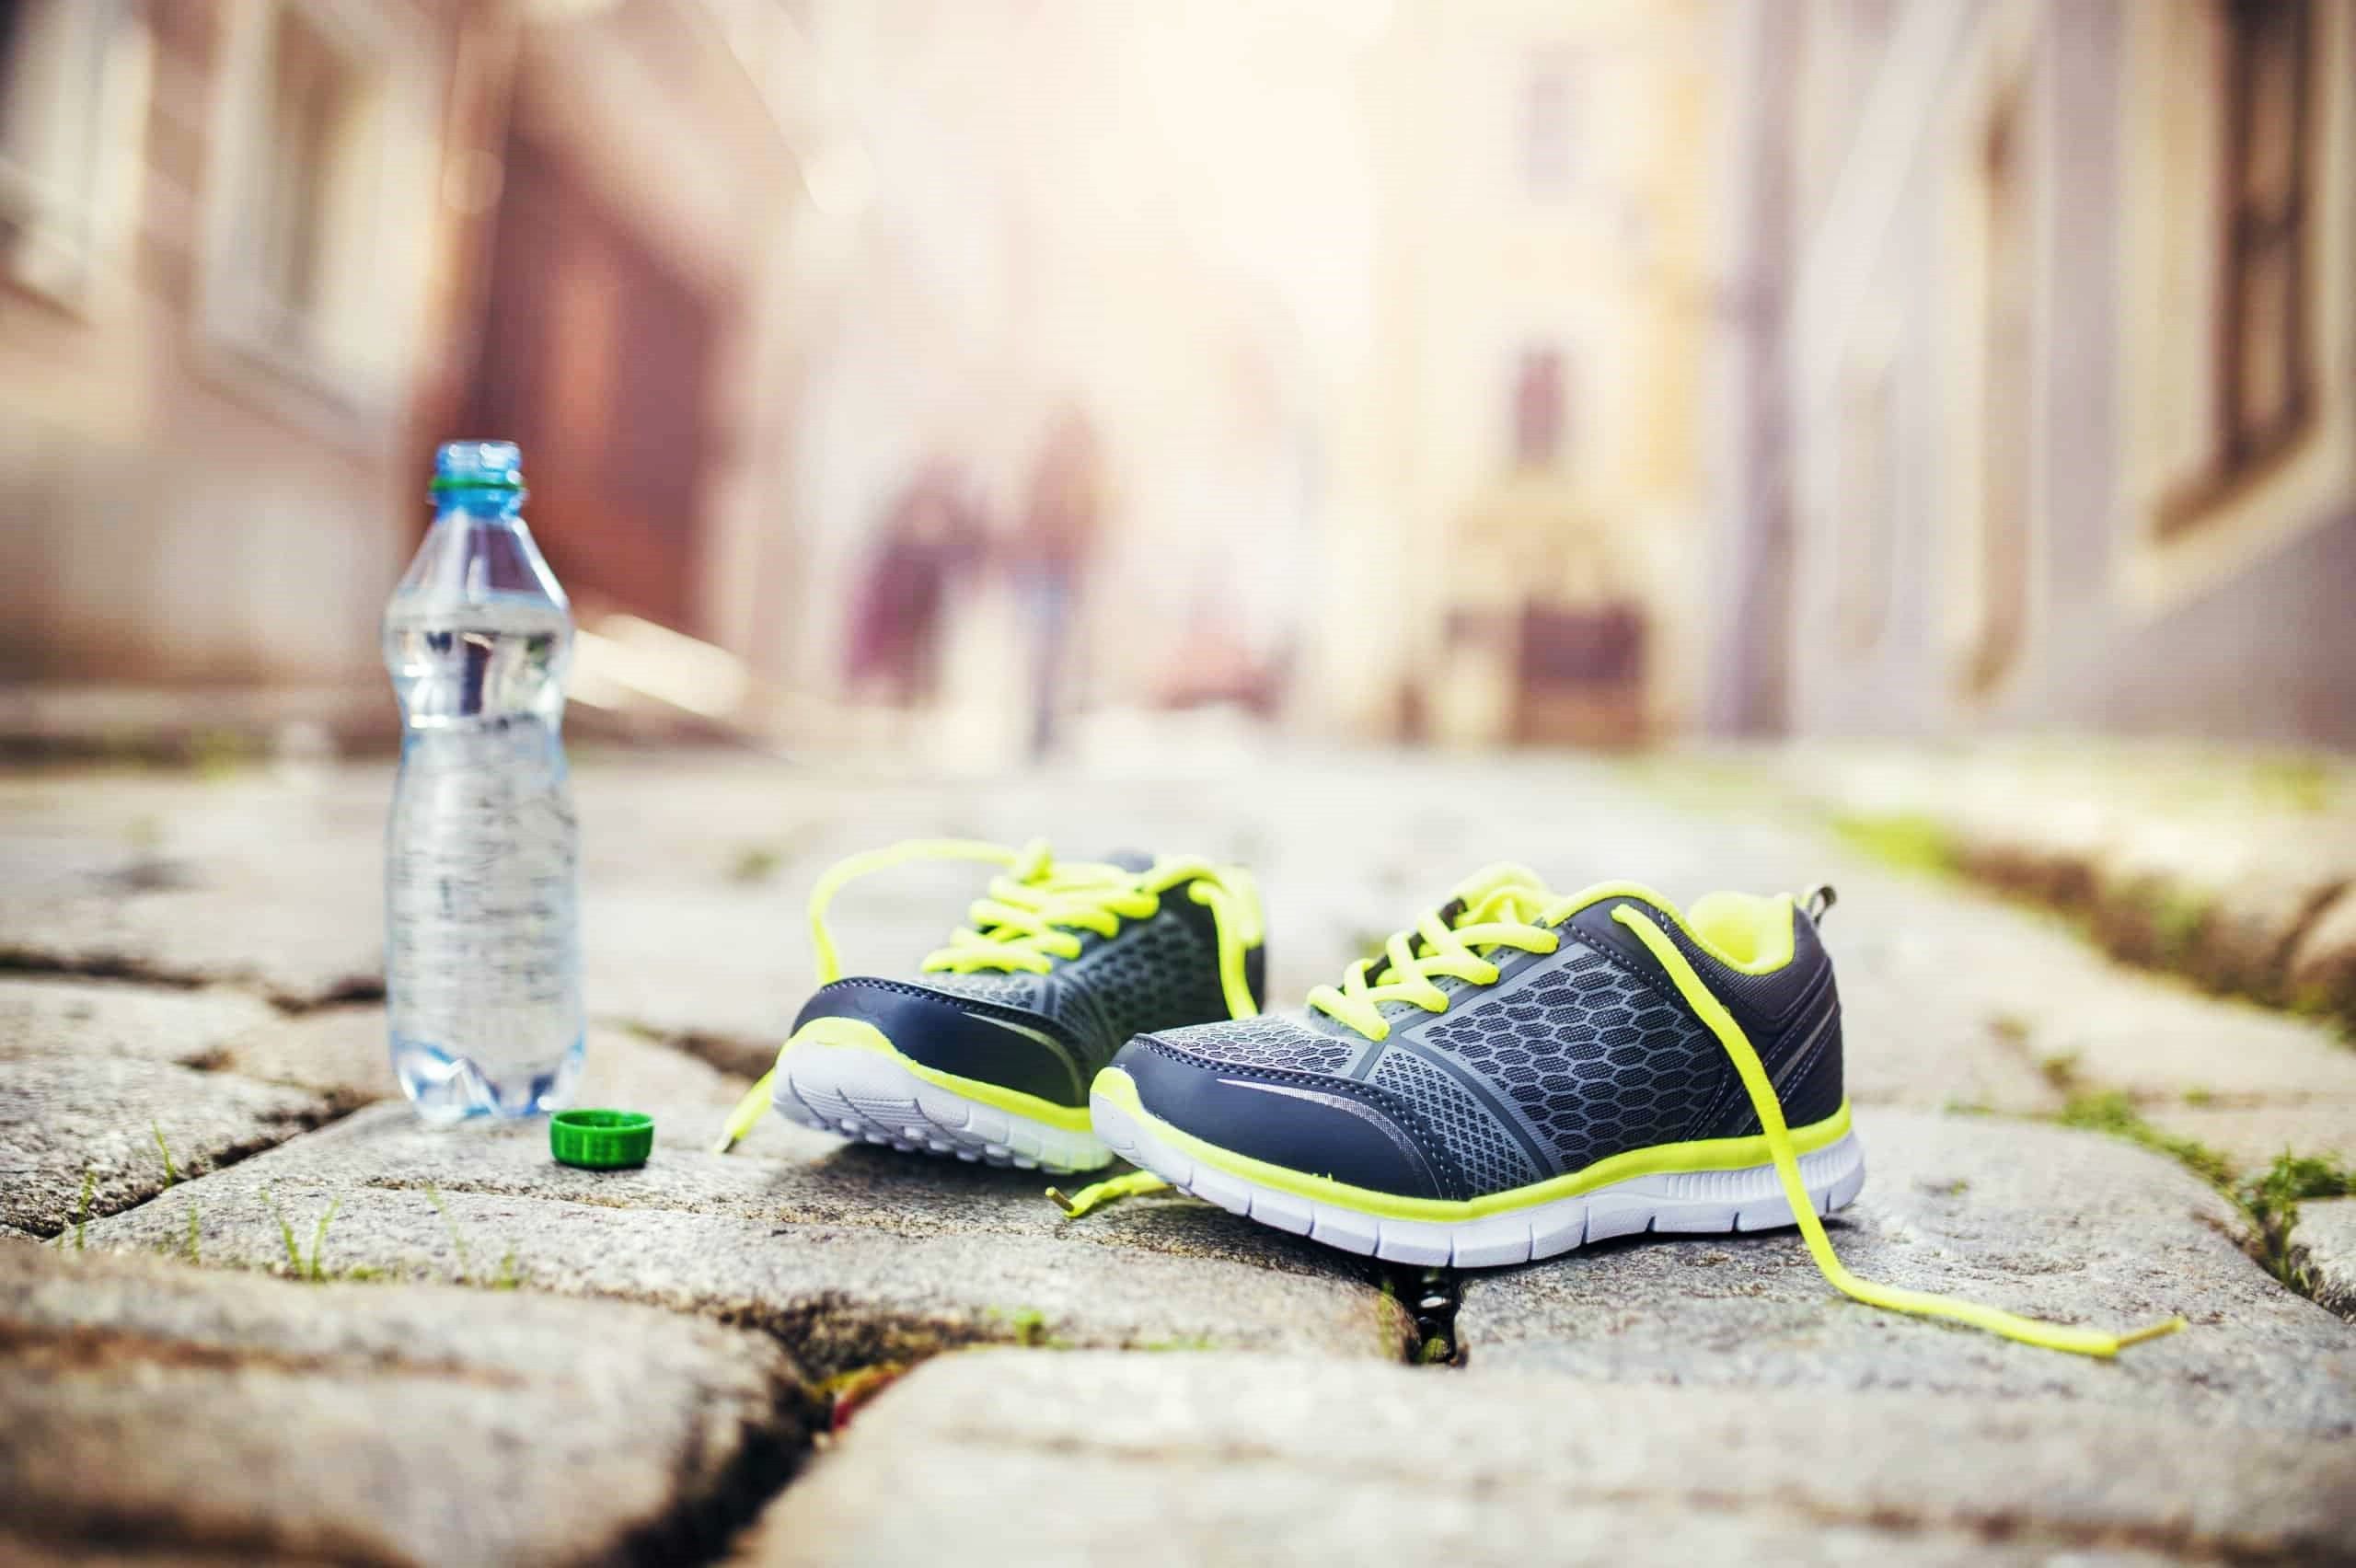 Is It Necessary To Hydrate During A One-hour Run?